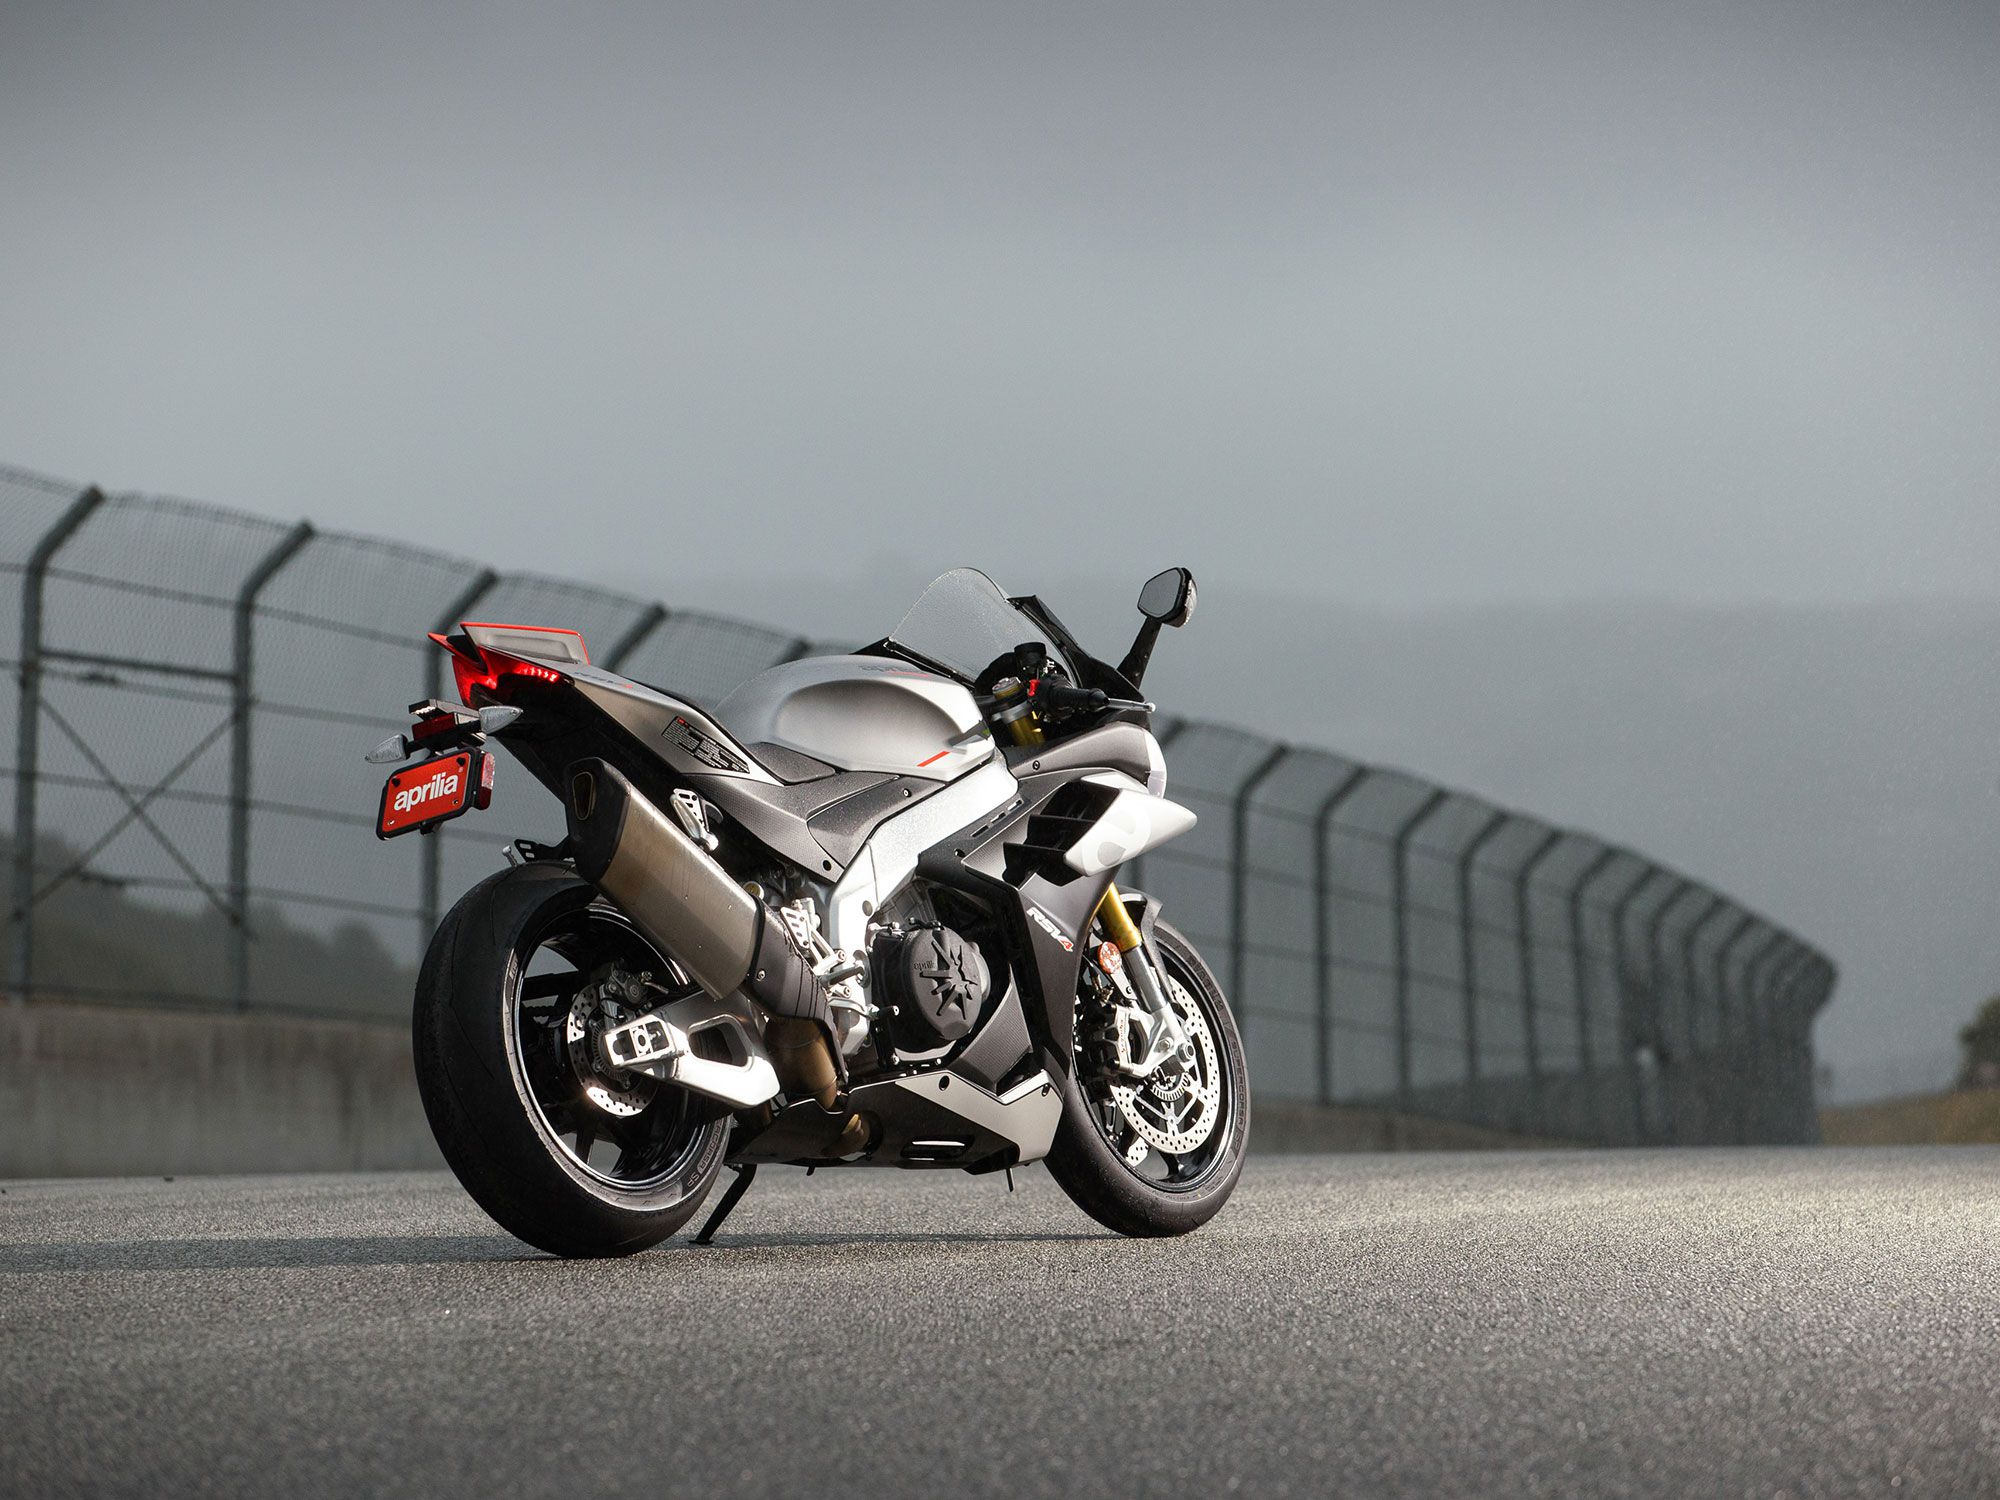 Aprilia offers incredible value in the superbike segment with its high-tech and ultrafast $18,999 RSV4 superbike.